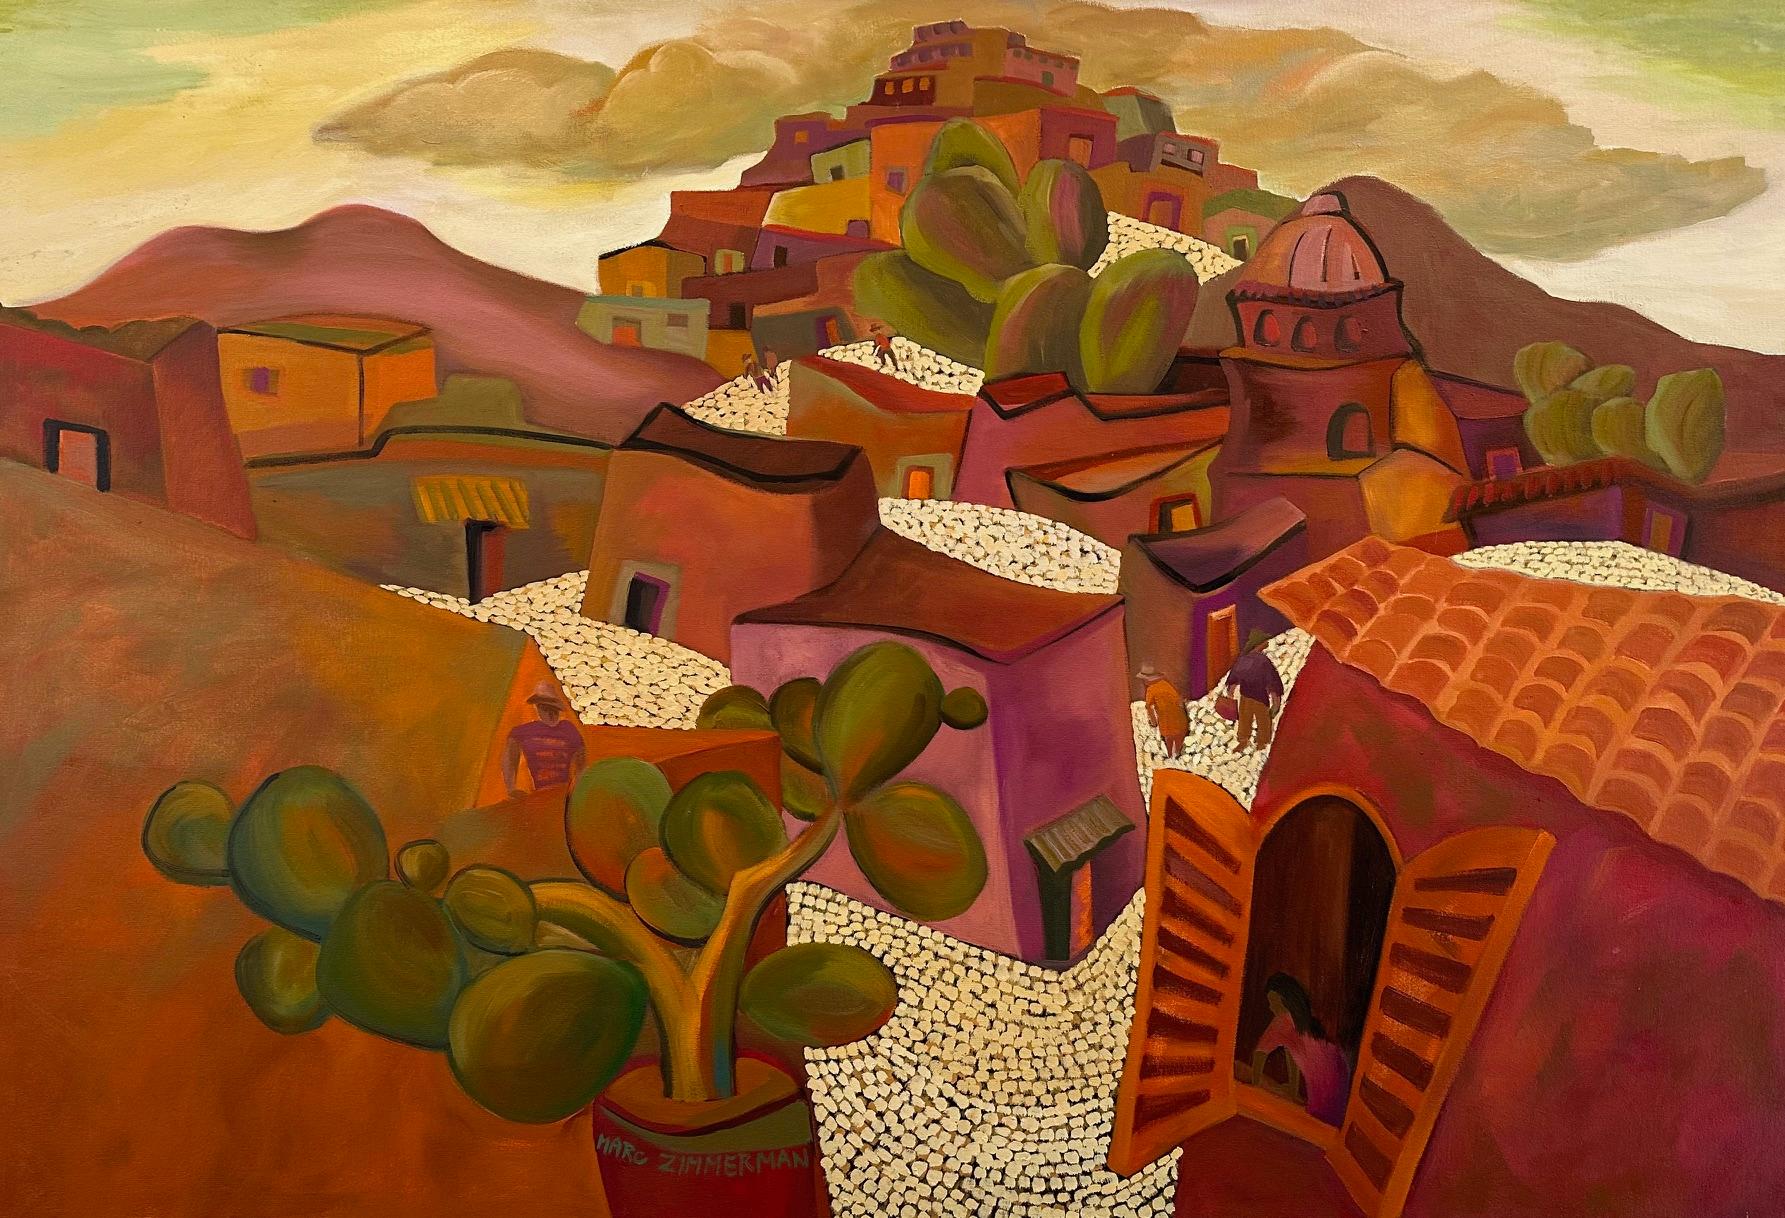 Large Mexican abstract village framed in with arches. Colors are an array of soft pastels and Magenta the village undulates in a gentle soothing rhythm.

Mexican Village With Arch - Landscape Painting - Abstract Geometric by Marc Zimmerman

This